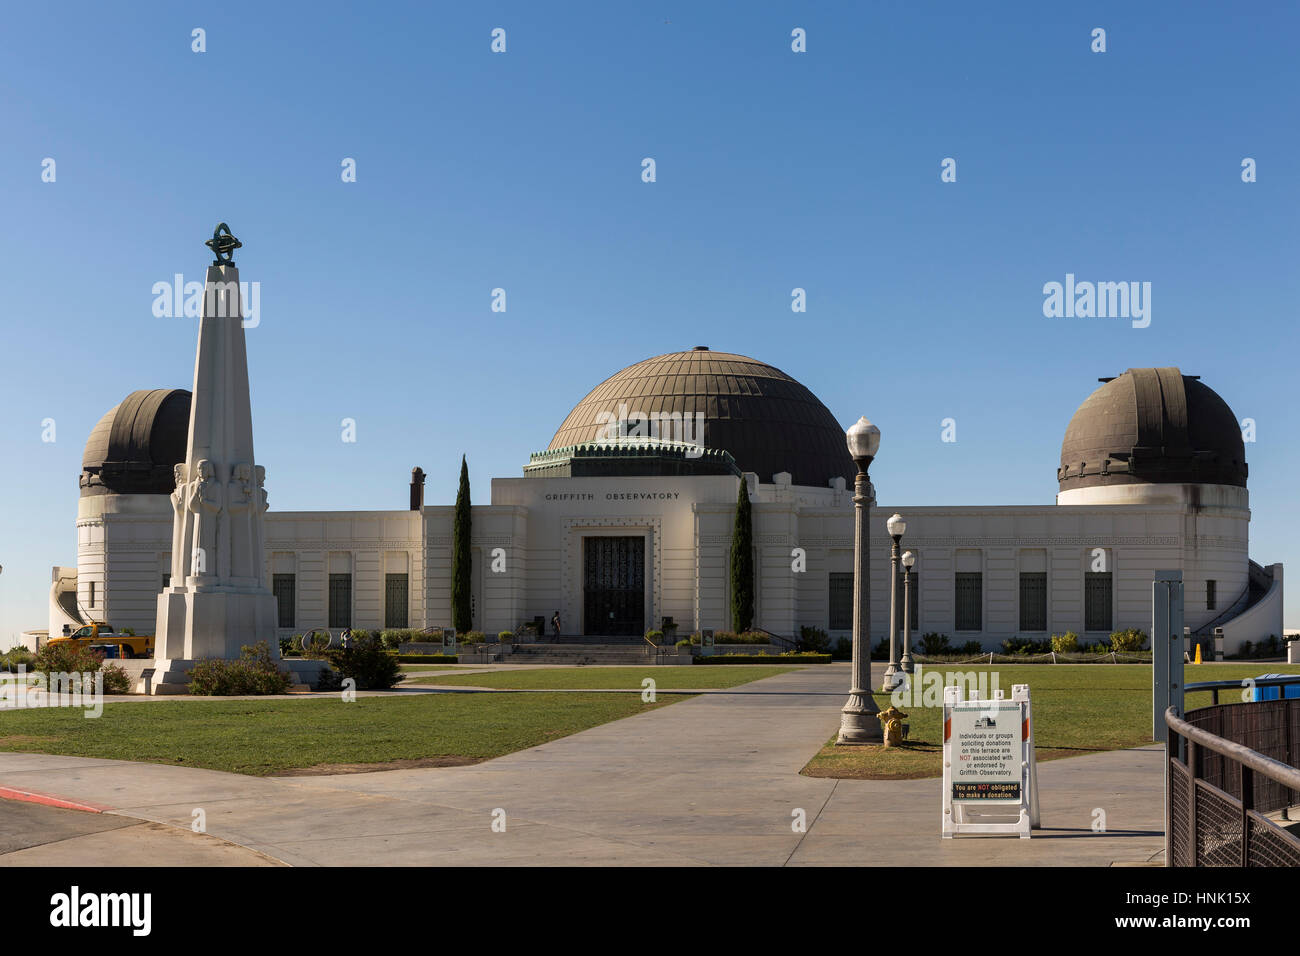 The Griffith Observatory. Aug, 2016. Los Angeles, California, U.S.A. Stock Photo